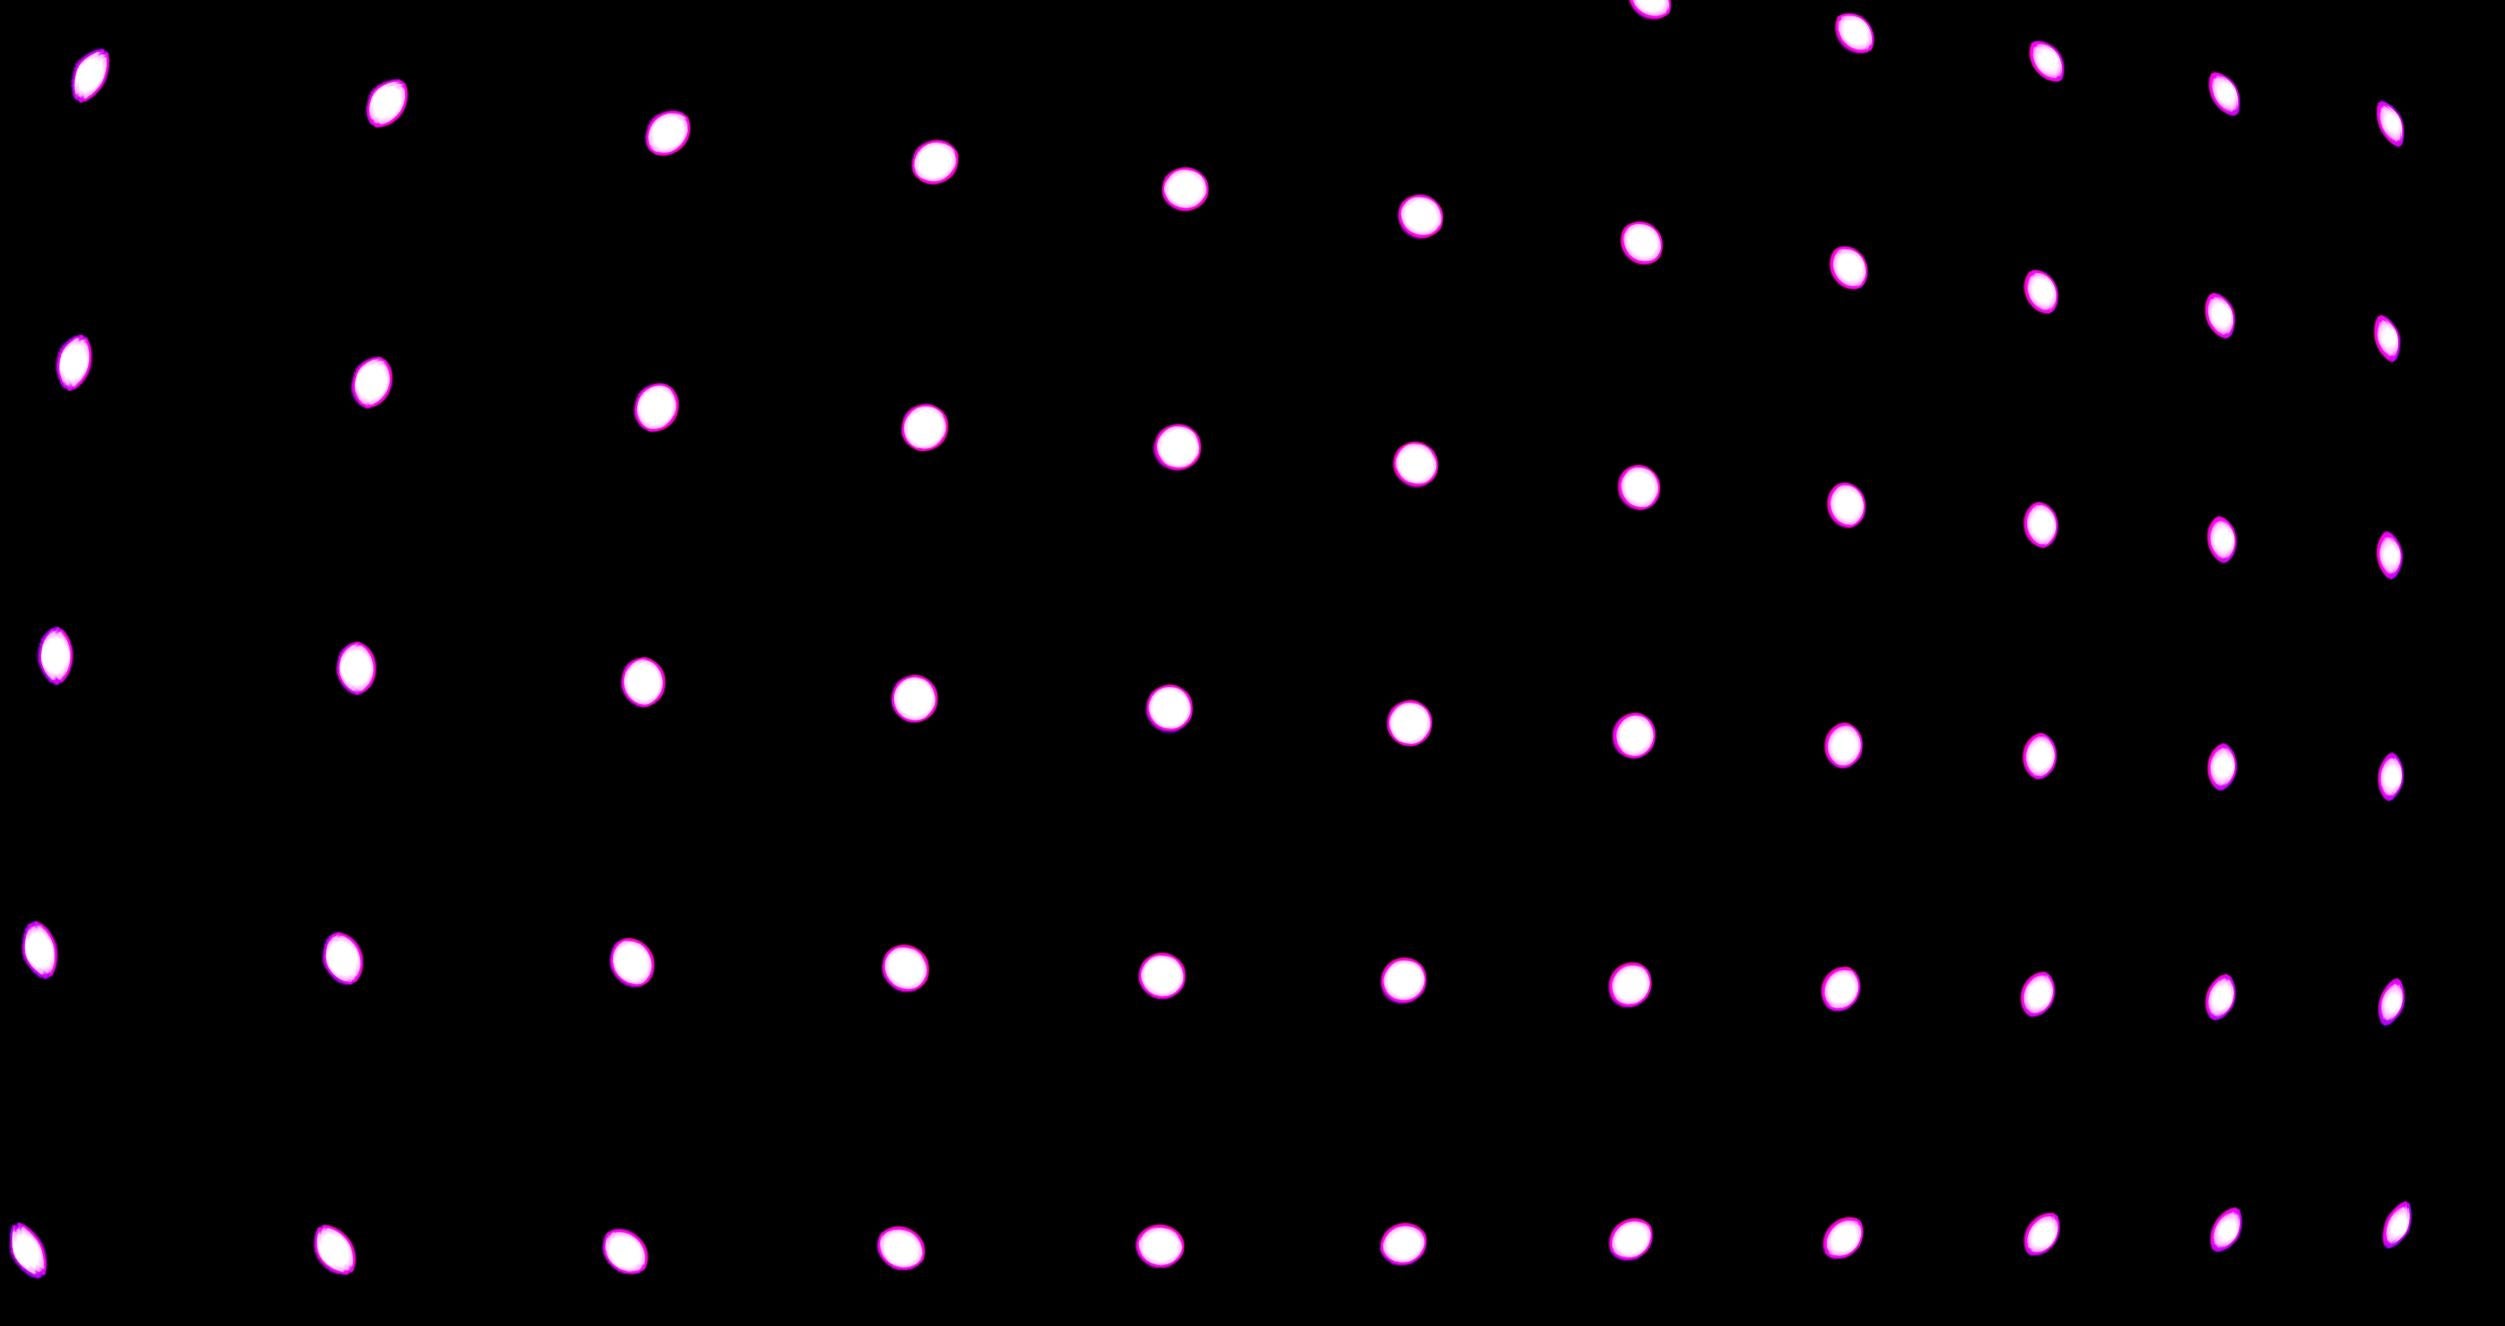 Bright dots in grid formation on black background